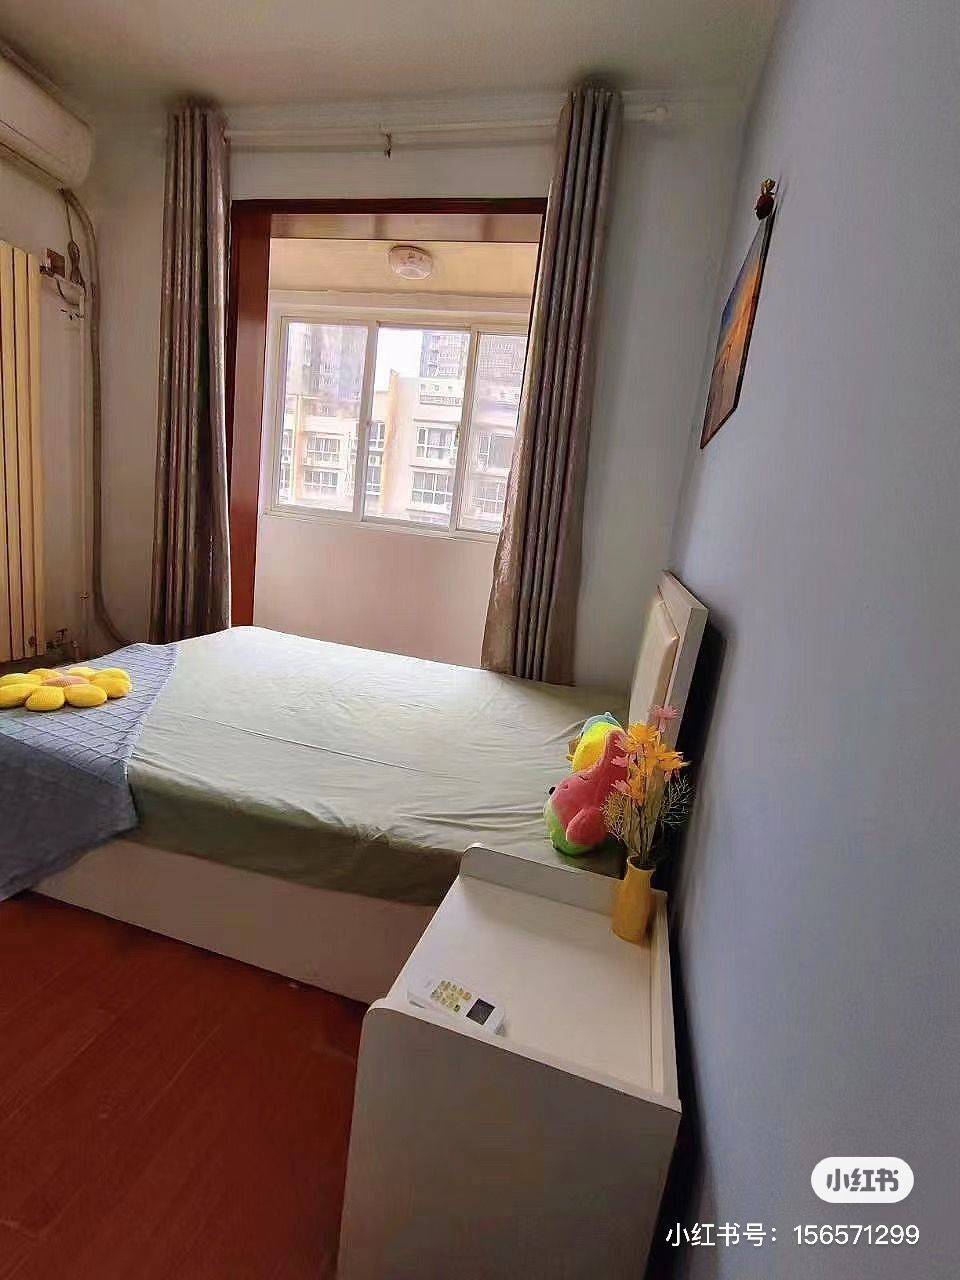 Xi'An-Weiyang-Cozy Home,Clean&Comfy,No Gender Limit,Hustle & Bustle,Chilled,LGBTQ Friendly,Pet Friendly